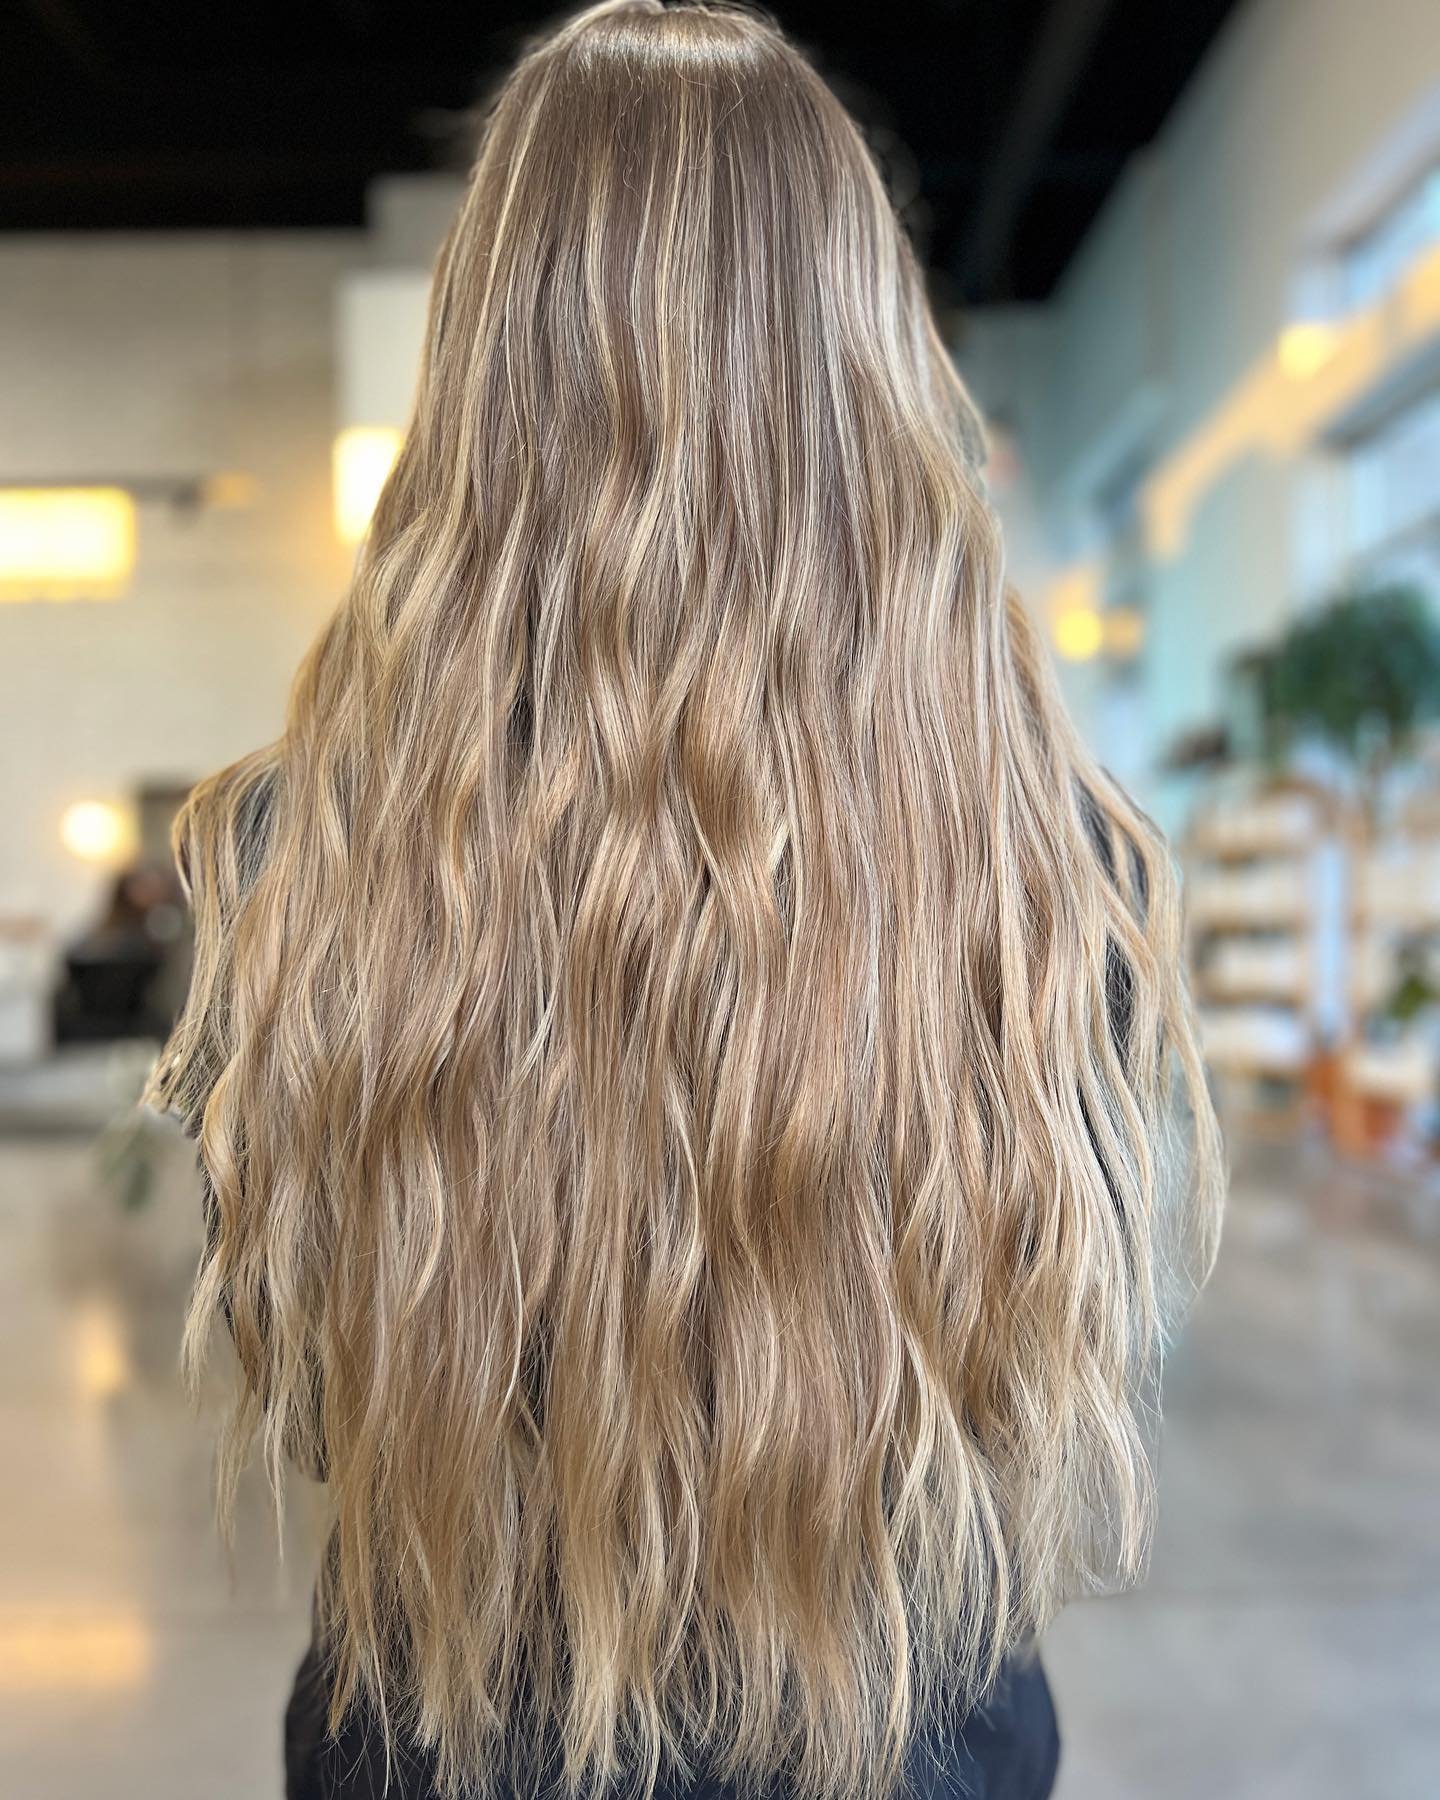 STORY TIME! 

This client came to me for her first extension consult early September 2023. Super low maintenance, looking for that lived-in sun kissed honey blonde and some extra fullness + a little length. 

As I was getting my hands in her hair I q